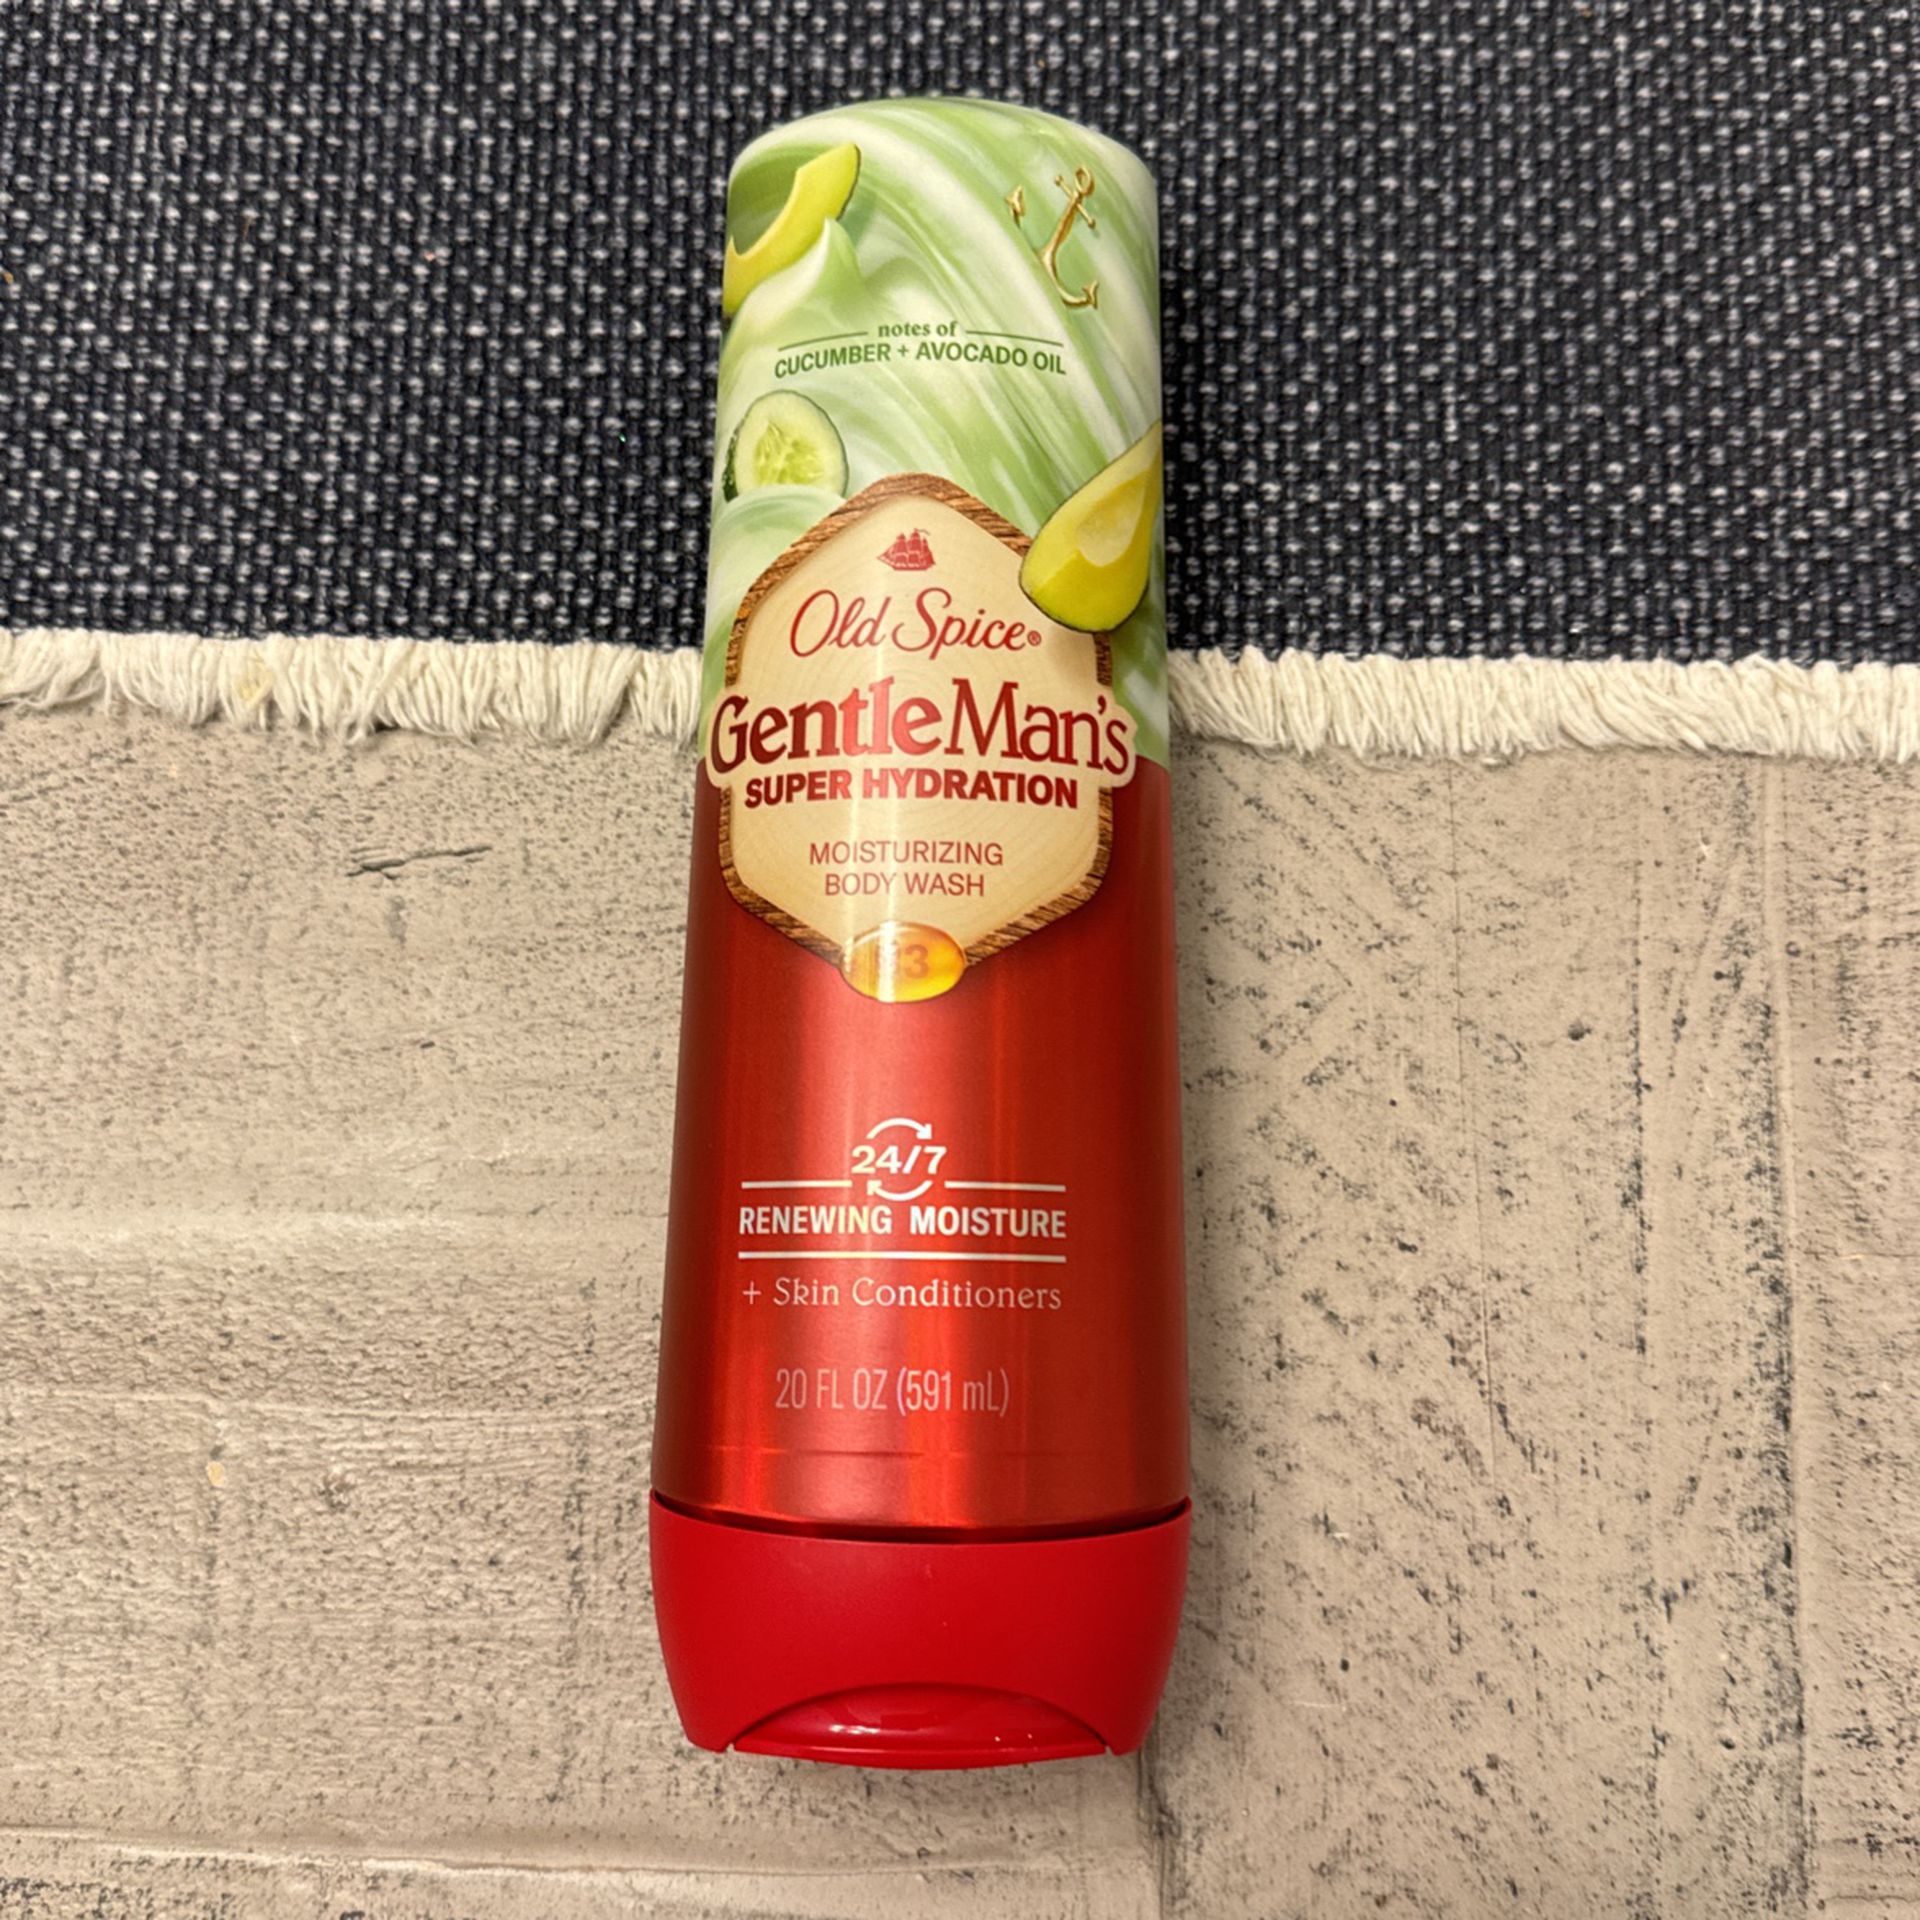 Old Spice GentleMan’s Blend Super Hydration Body Wash, Cucumber Avocado Oil, for All Skin Types, 20oz